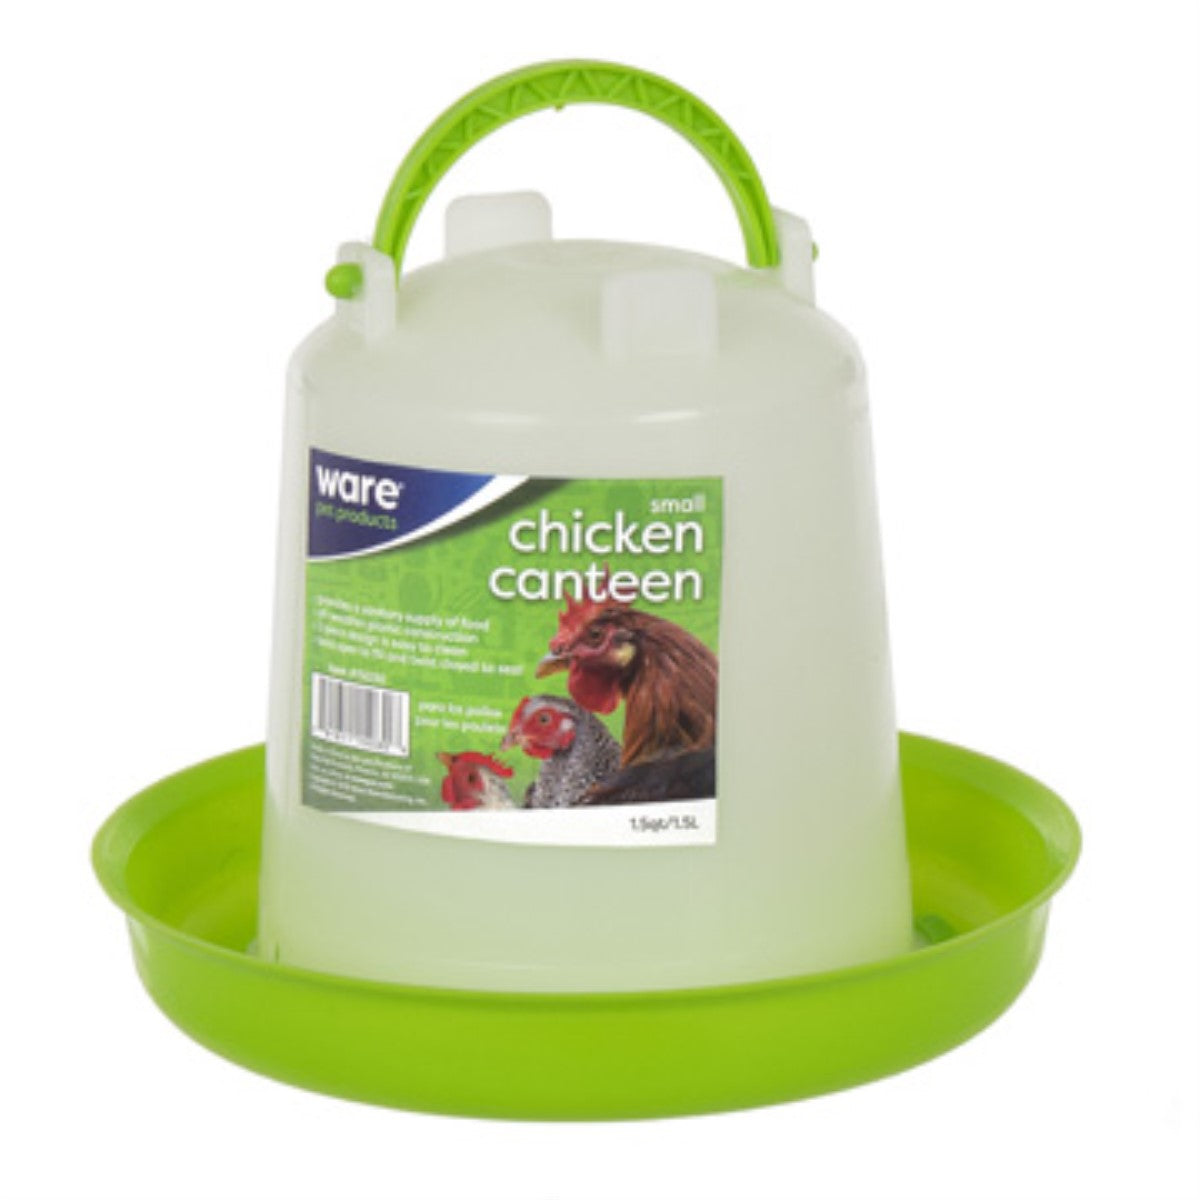 CHICK-N-CANTEEN SMALL QUART 15